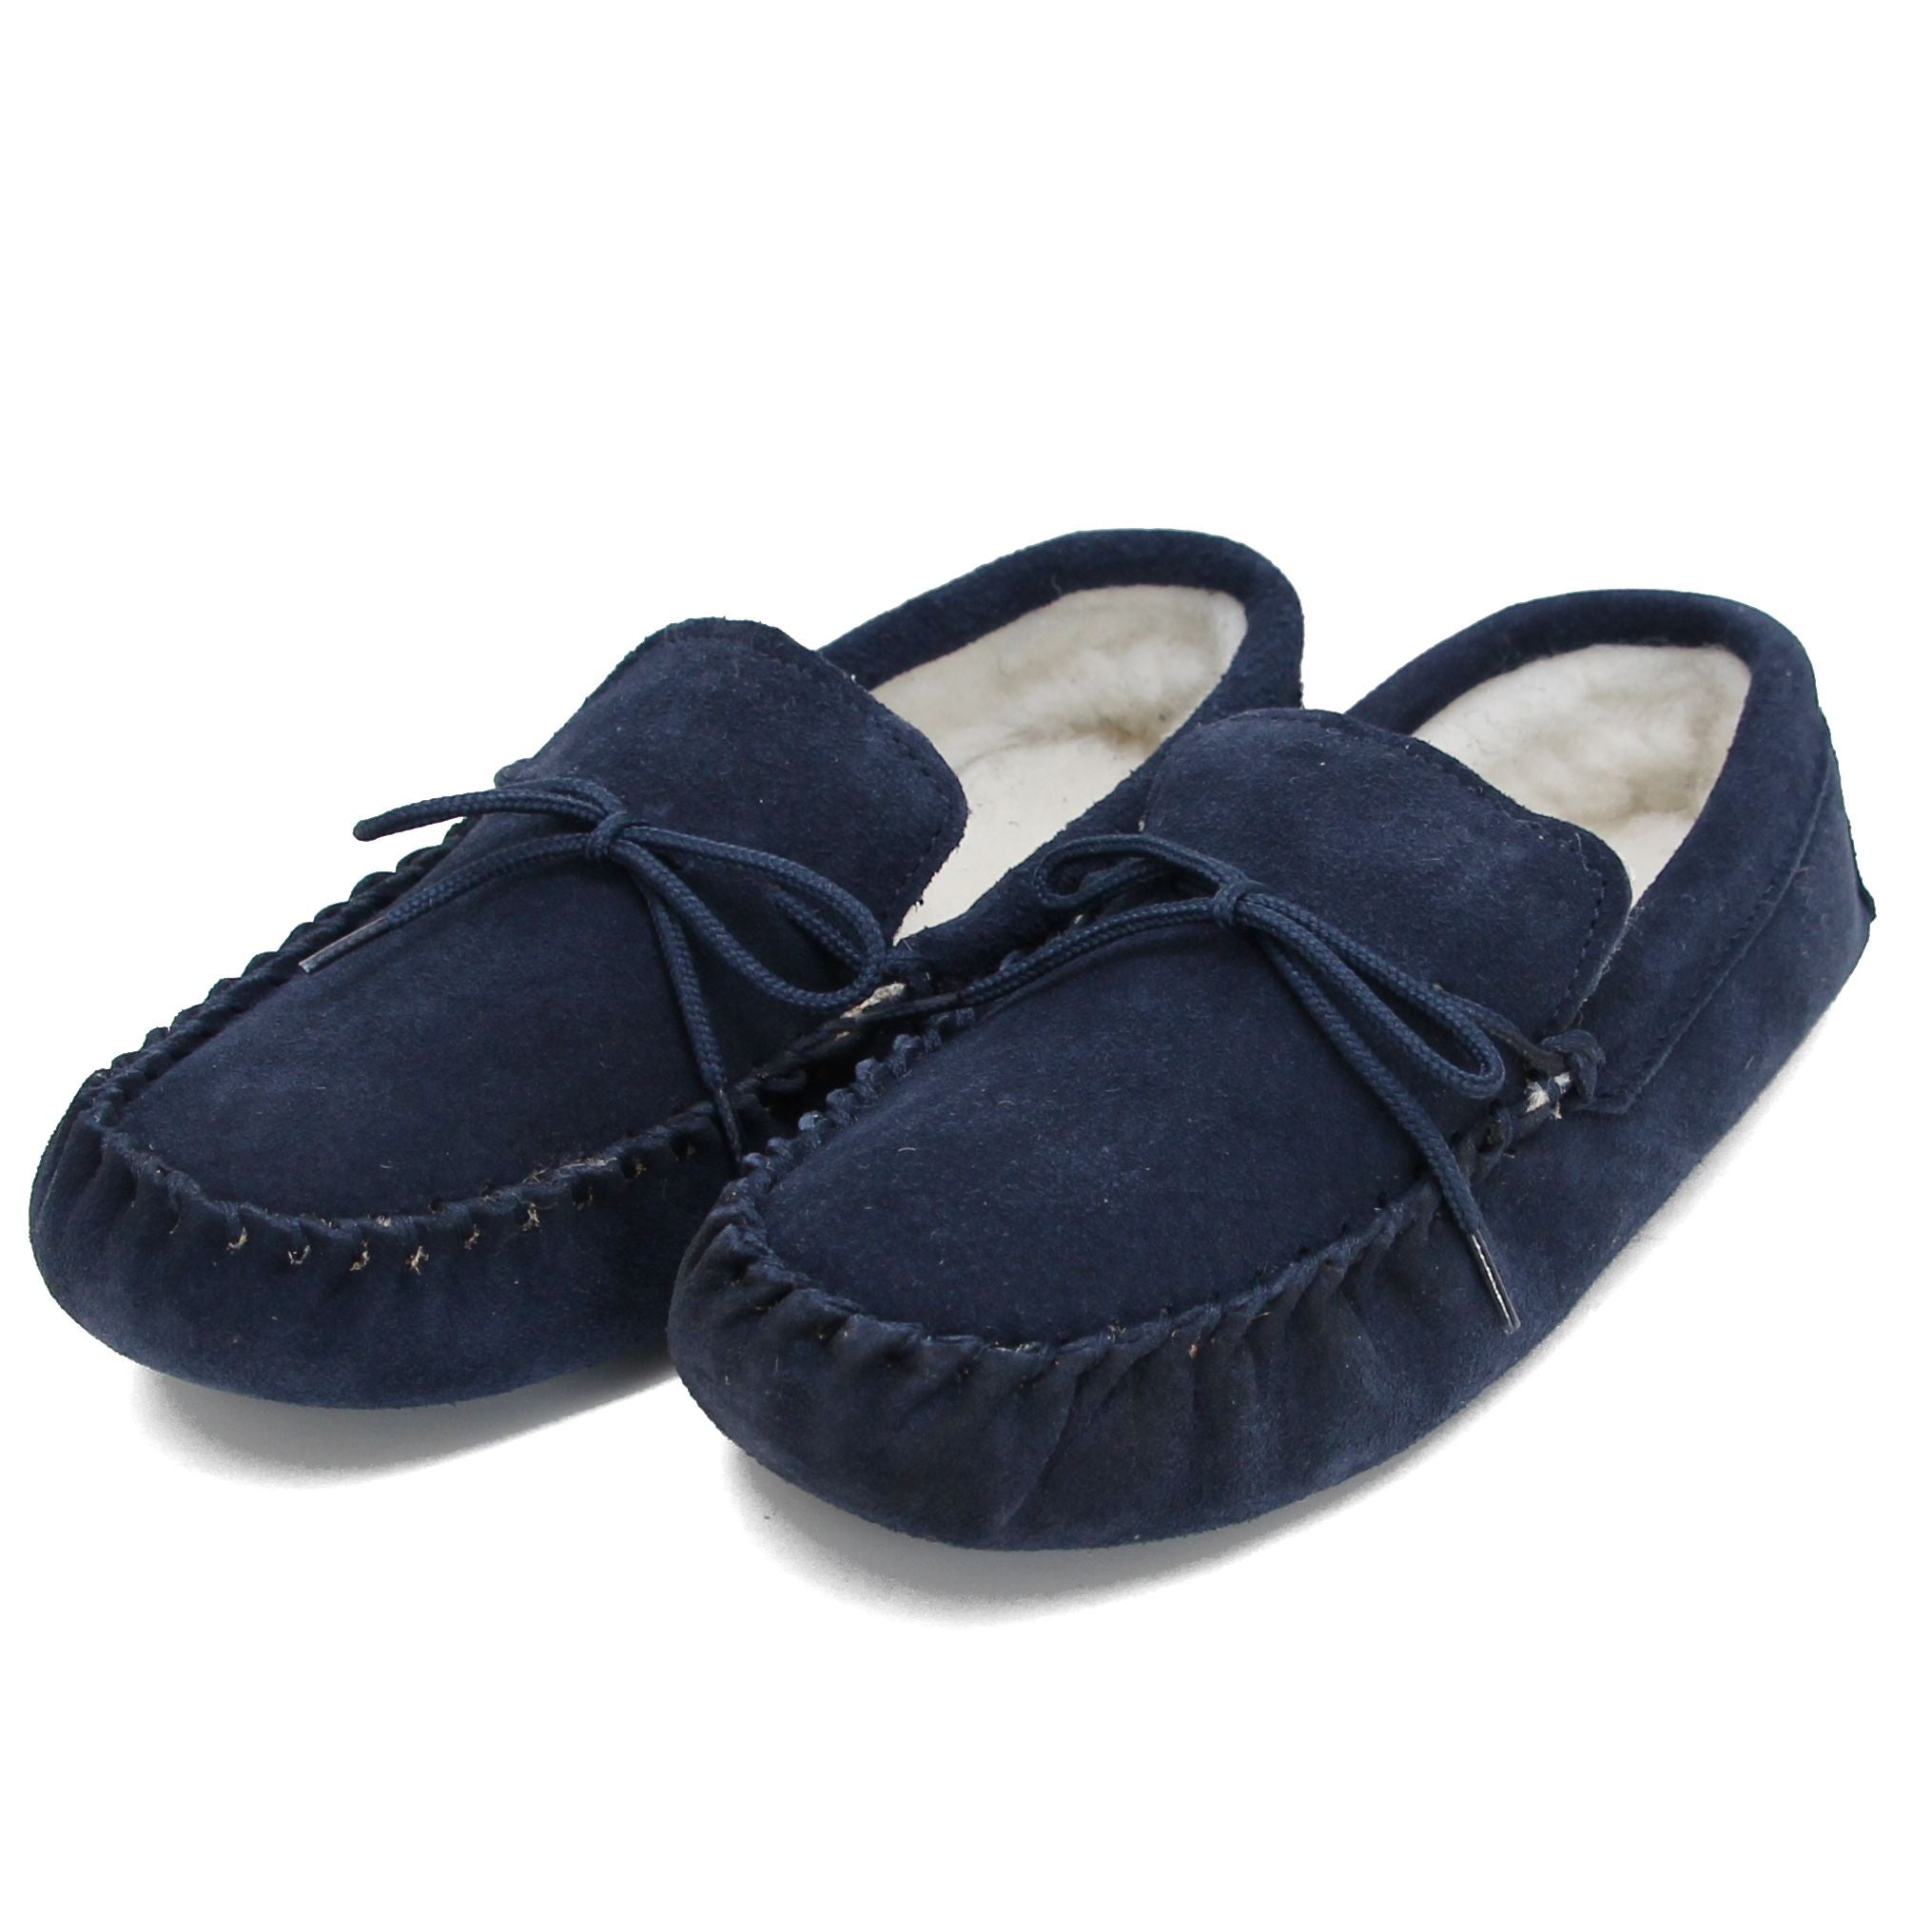 Ladies 'Taylor' Lambswool Moccasin with Soft Sole - Navy